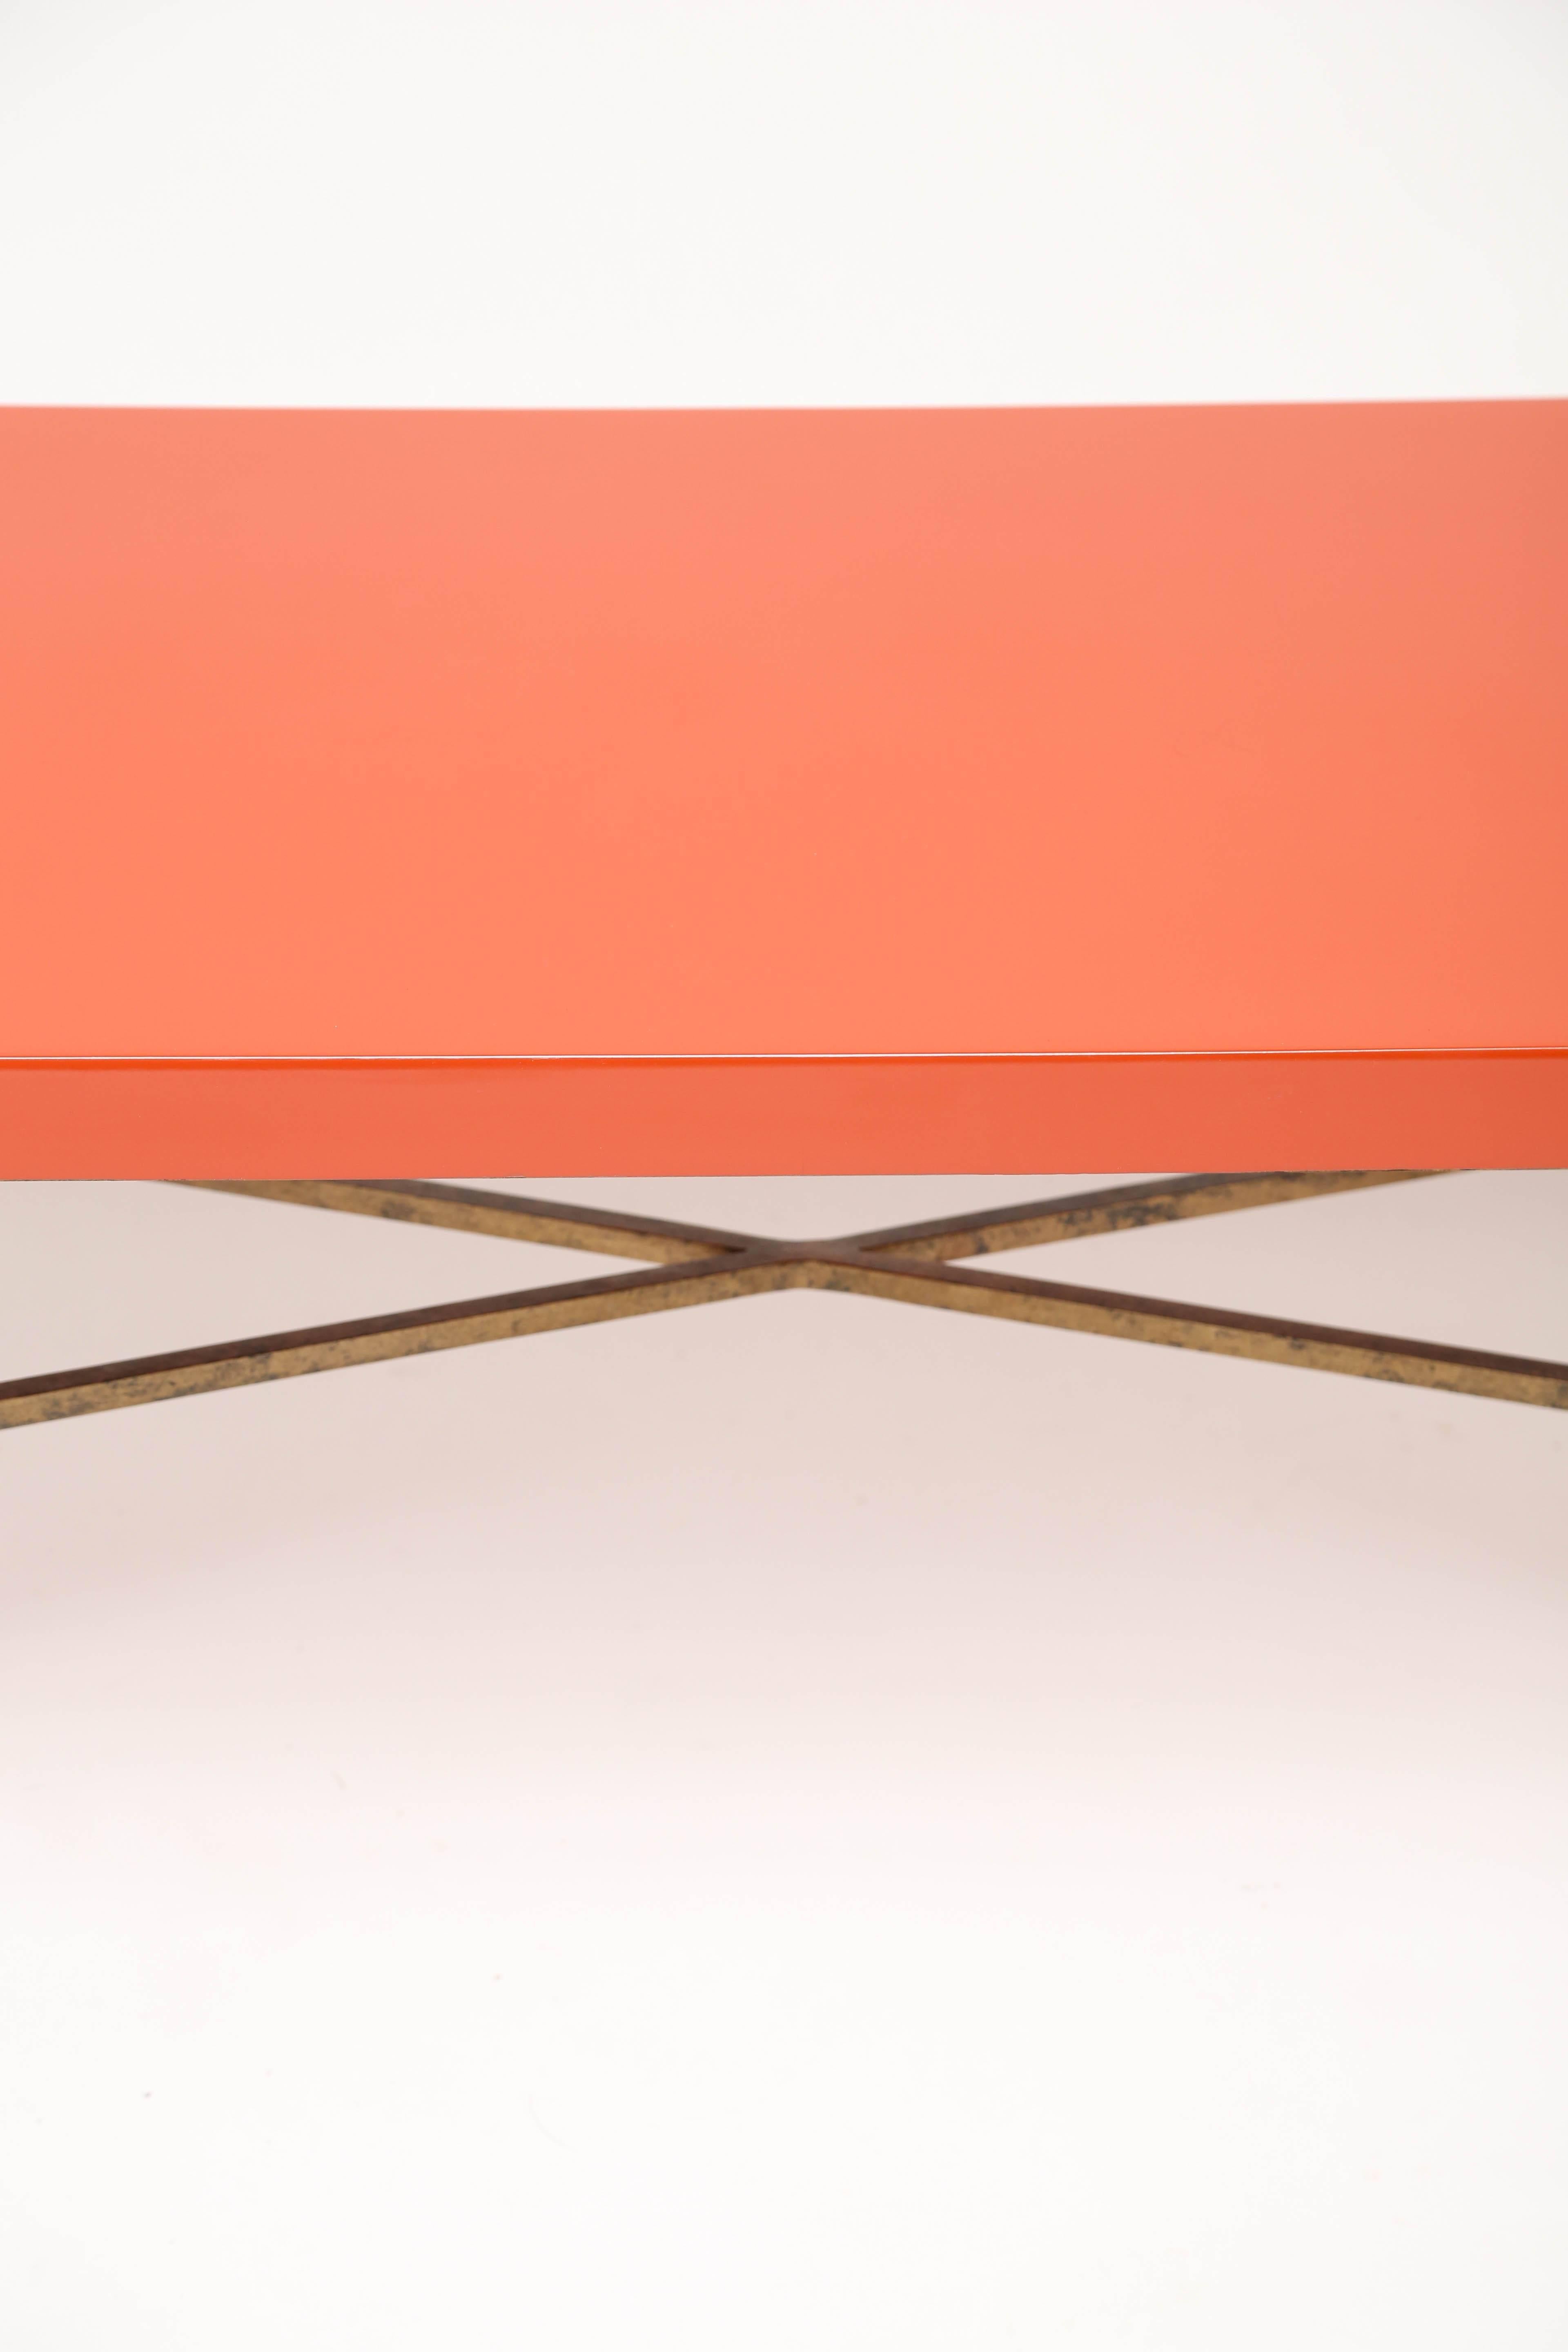 Mid-20th Century Tommi Parzinger Expanding Coffee Table